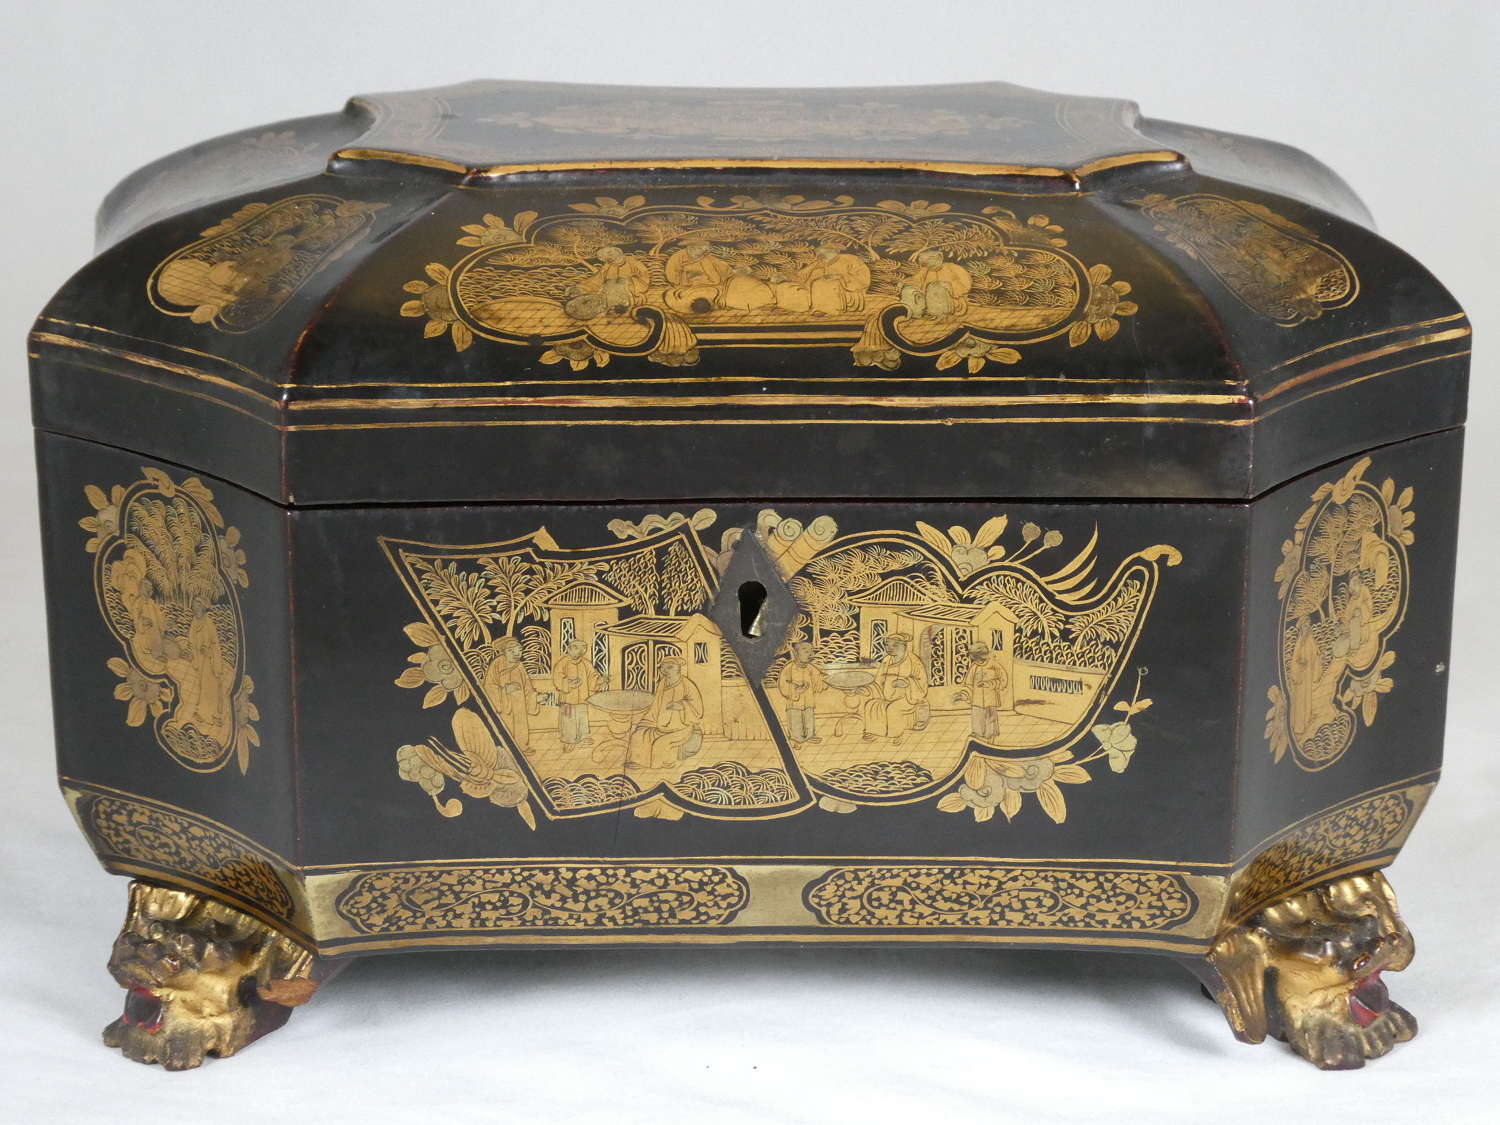 19th century Chinese Export Tea Caddy